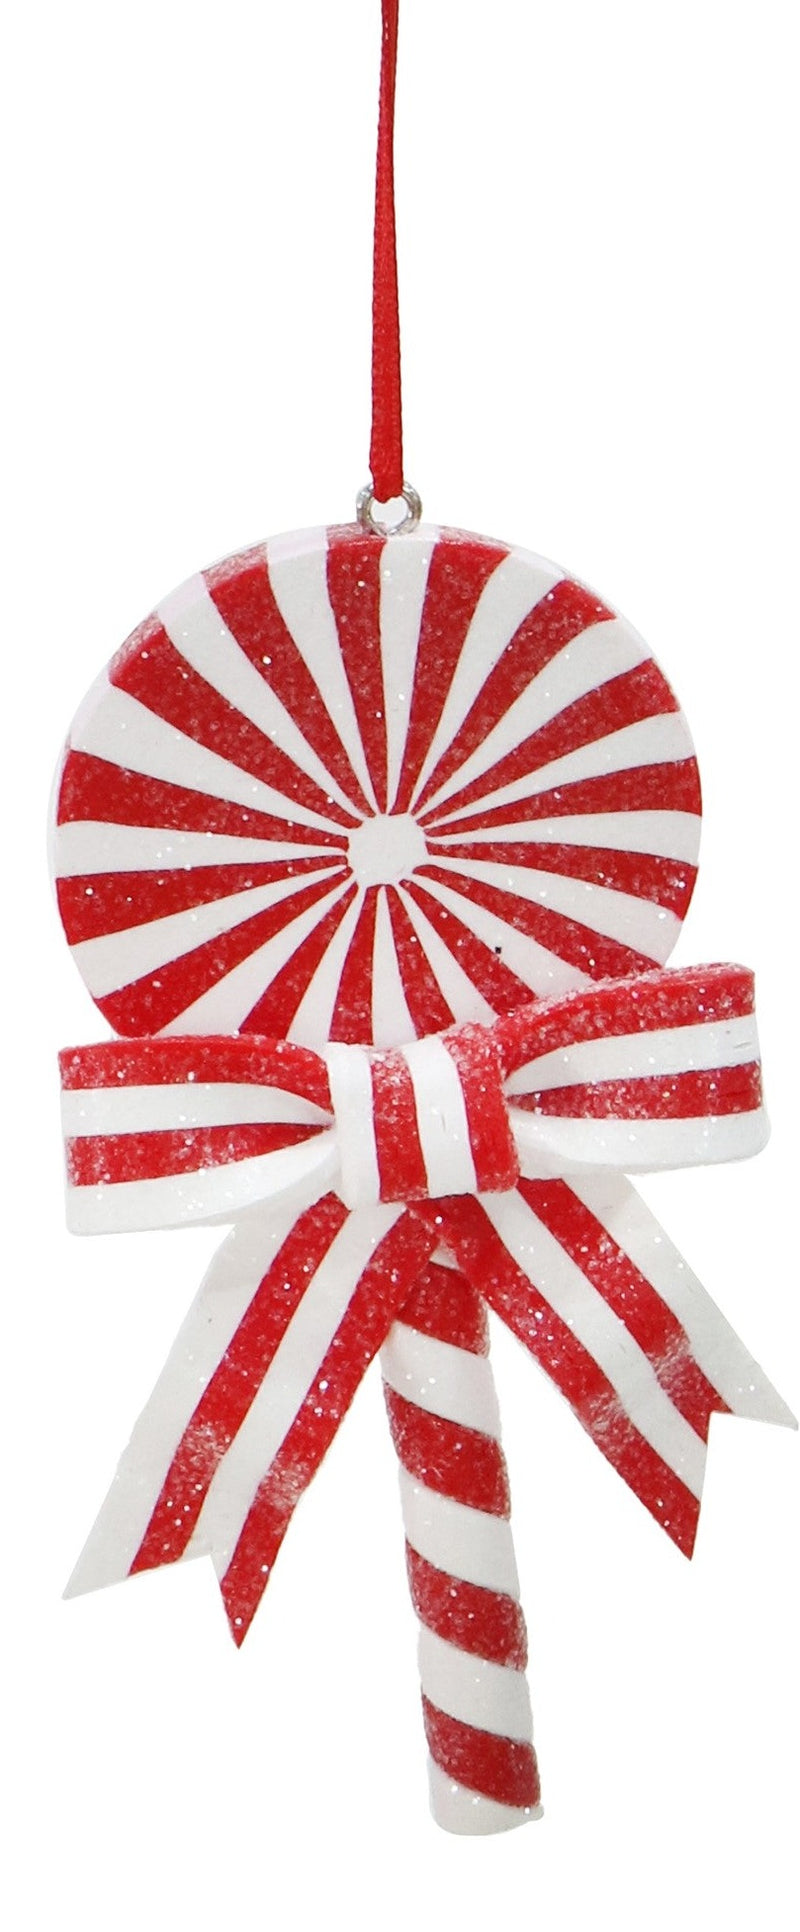 COMING SOON - HANGING CANDY CANE LOLLIPOP